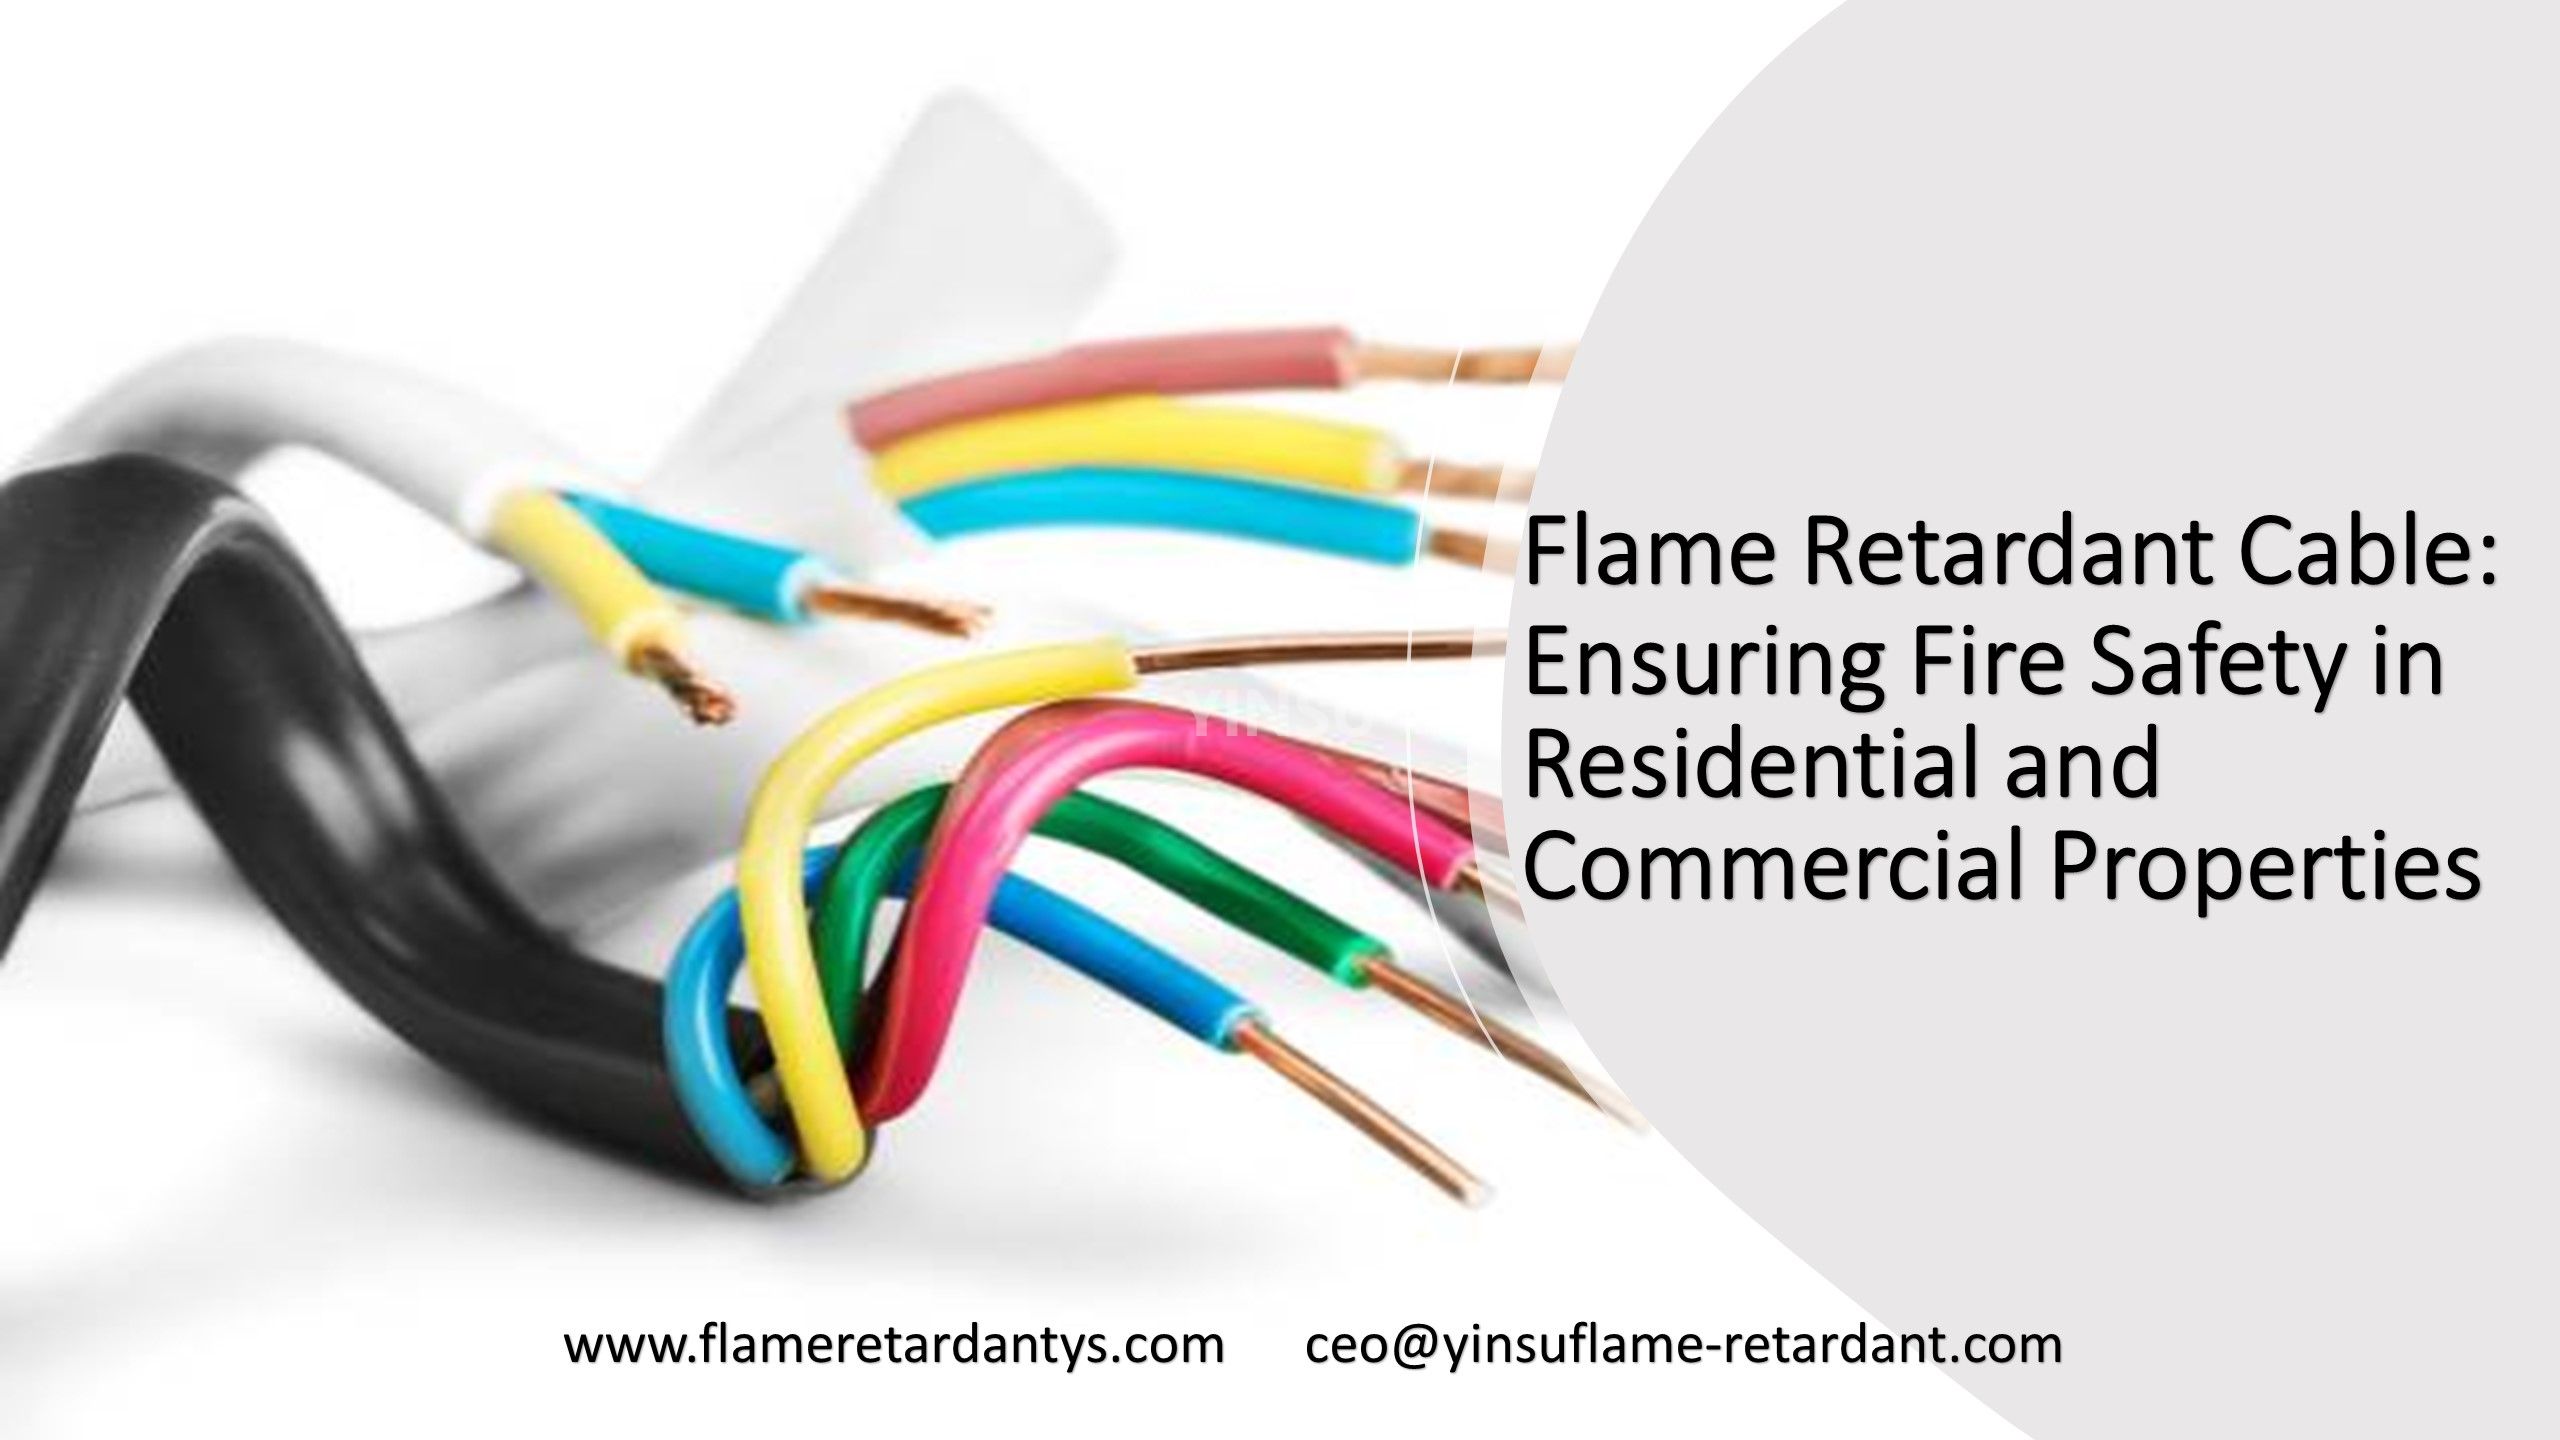 10.11 Flame Retardant Cable Ensuring Fire Safety in Residential and Commercial Properties